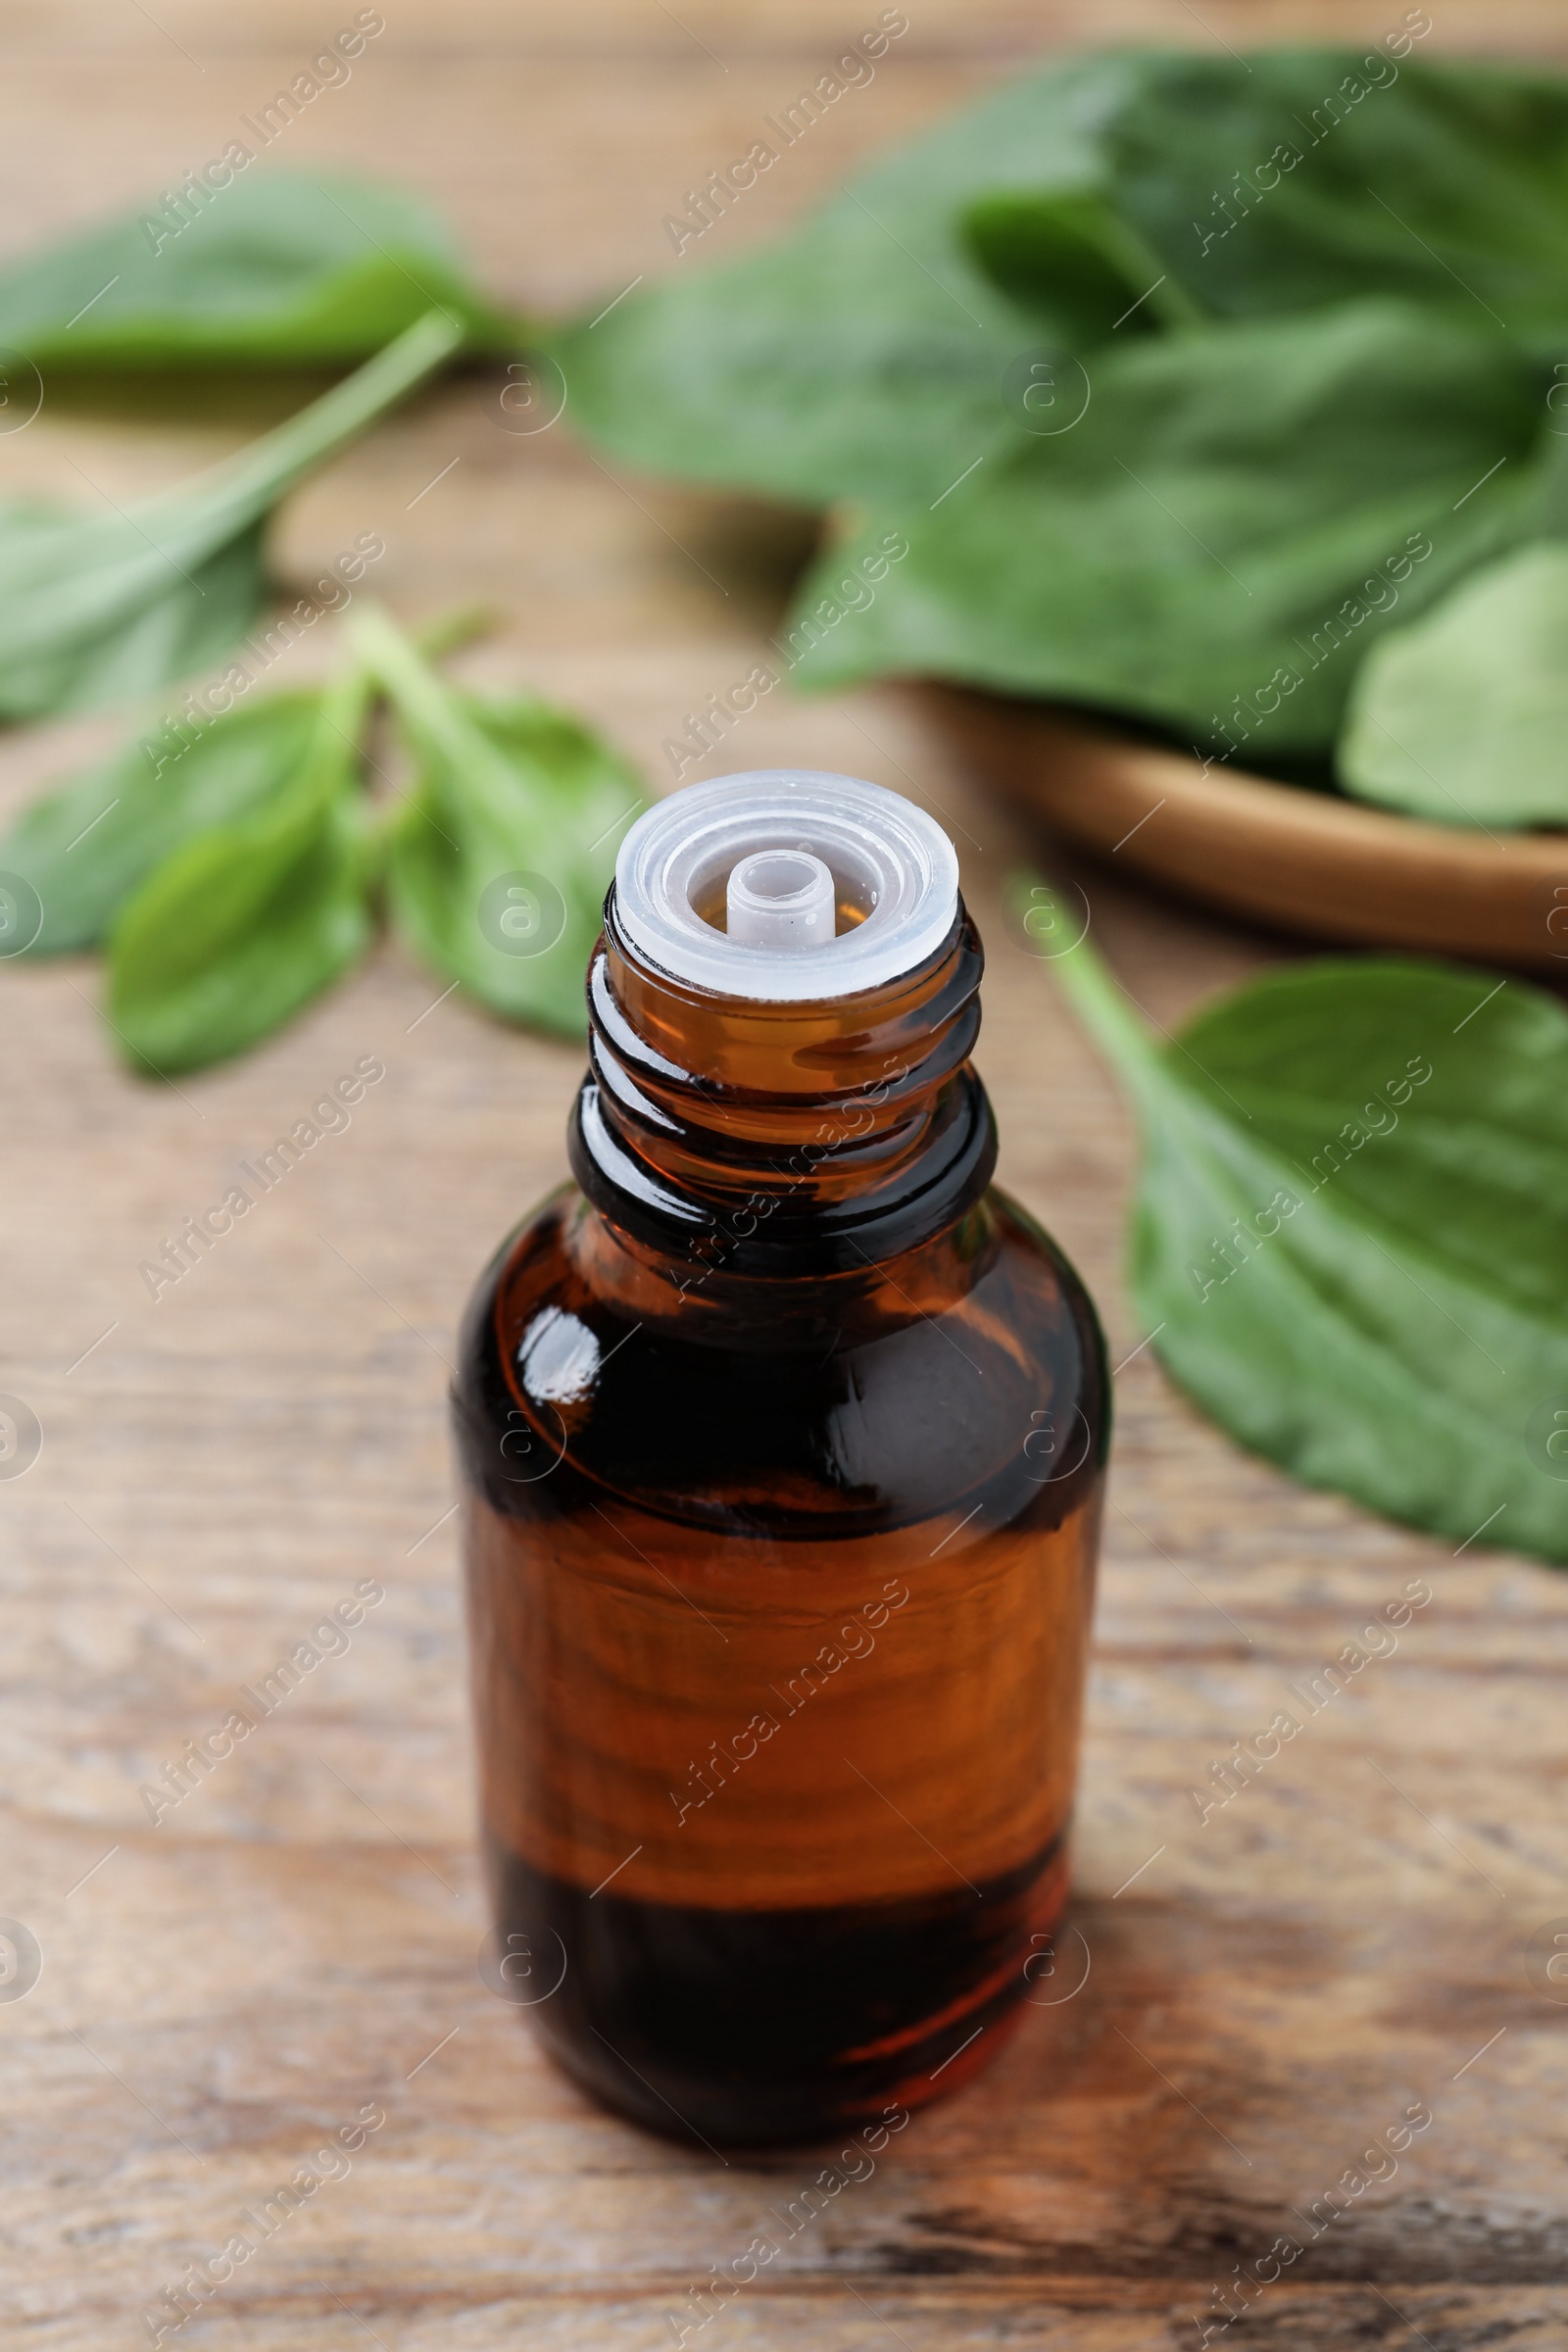 Photo of Bottle of broadleaf plantain extract and leaves on wooden table